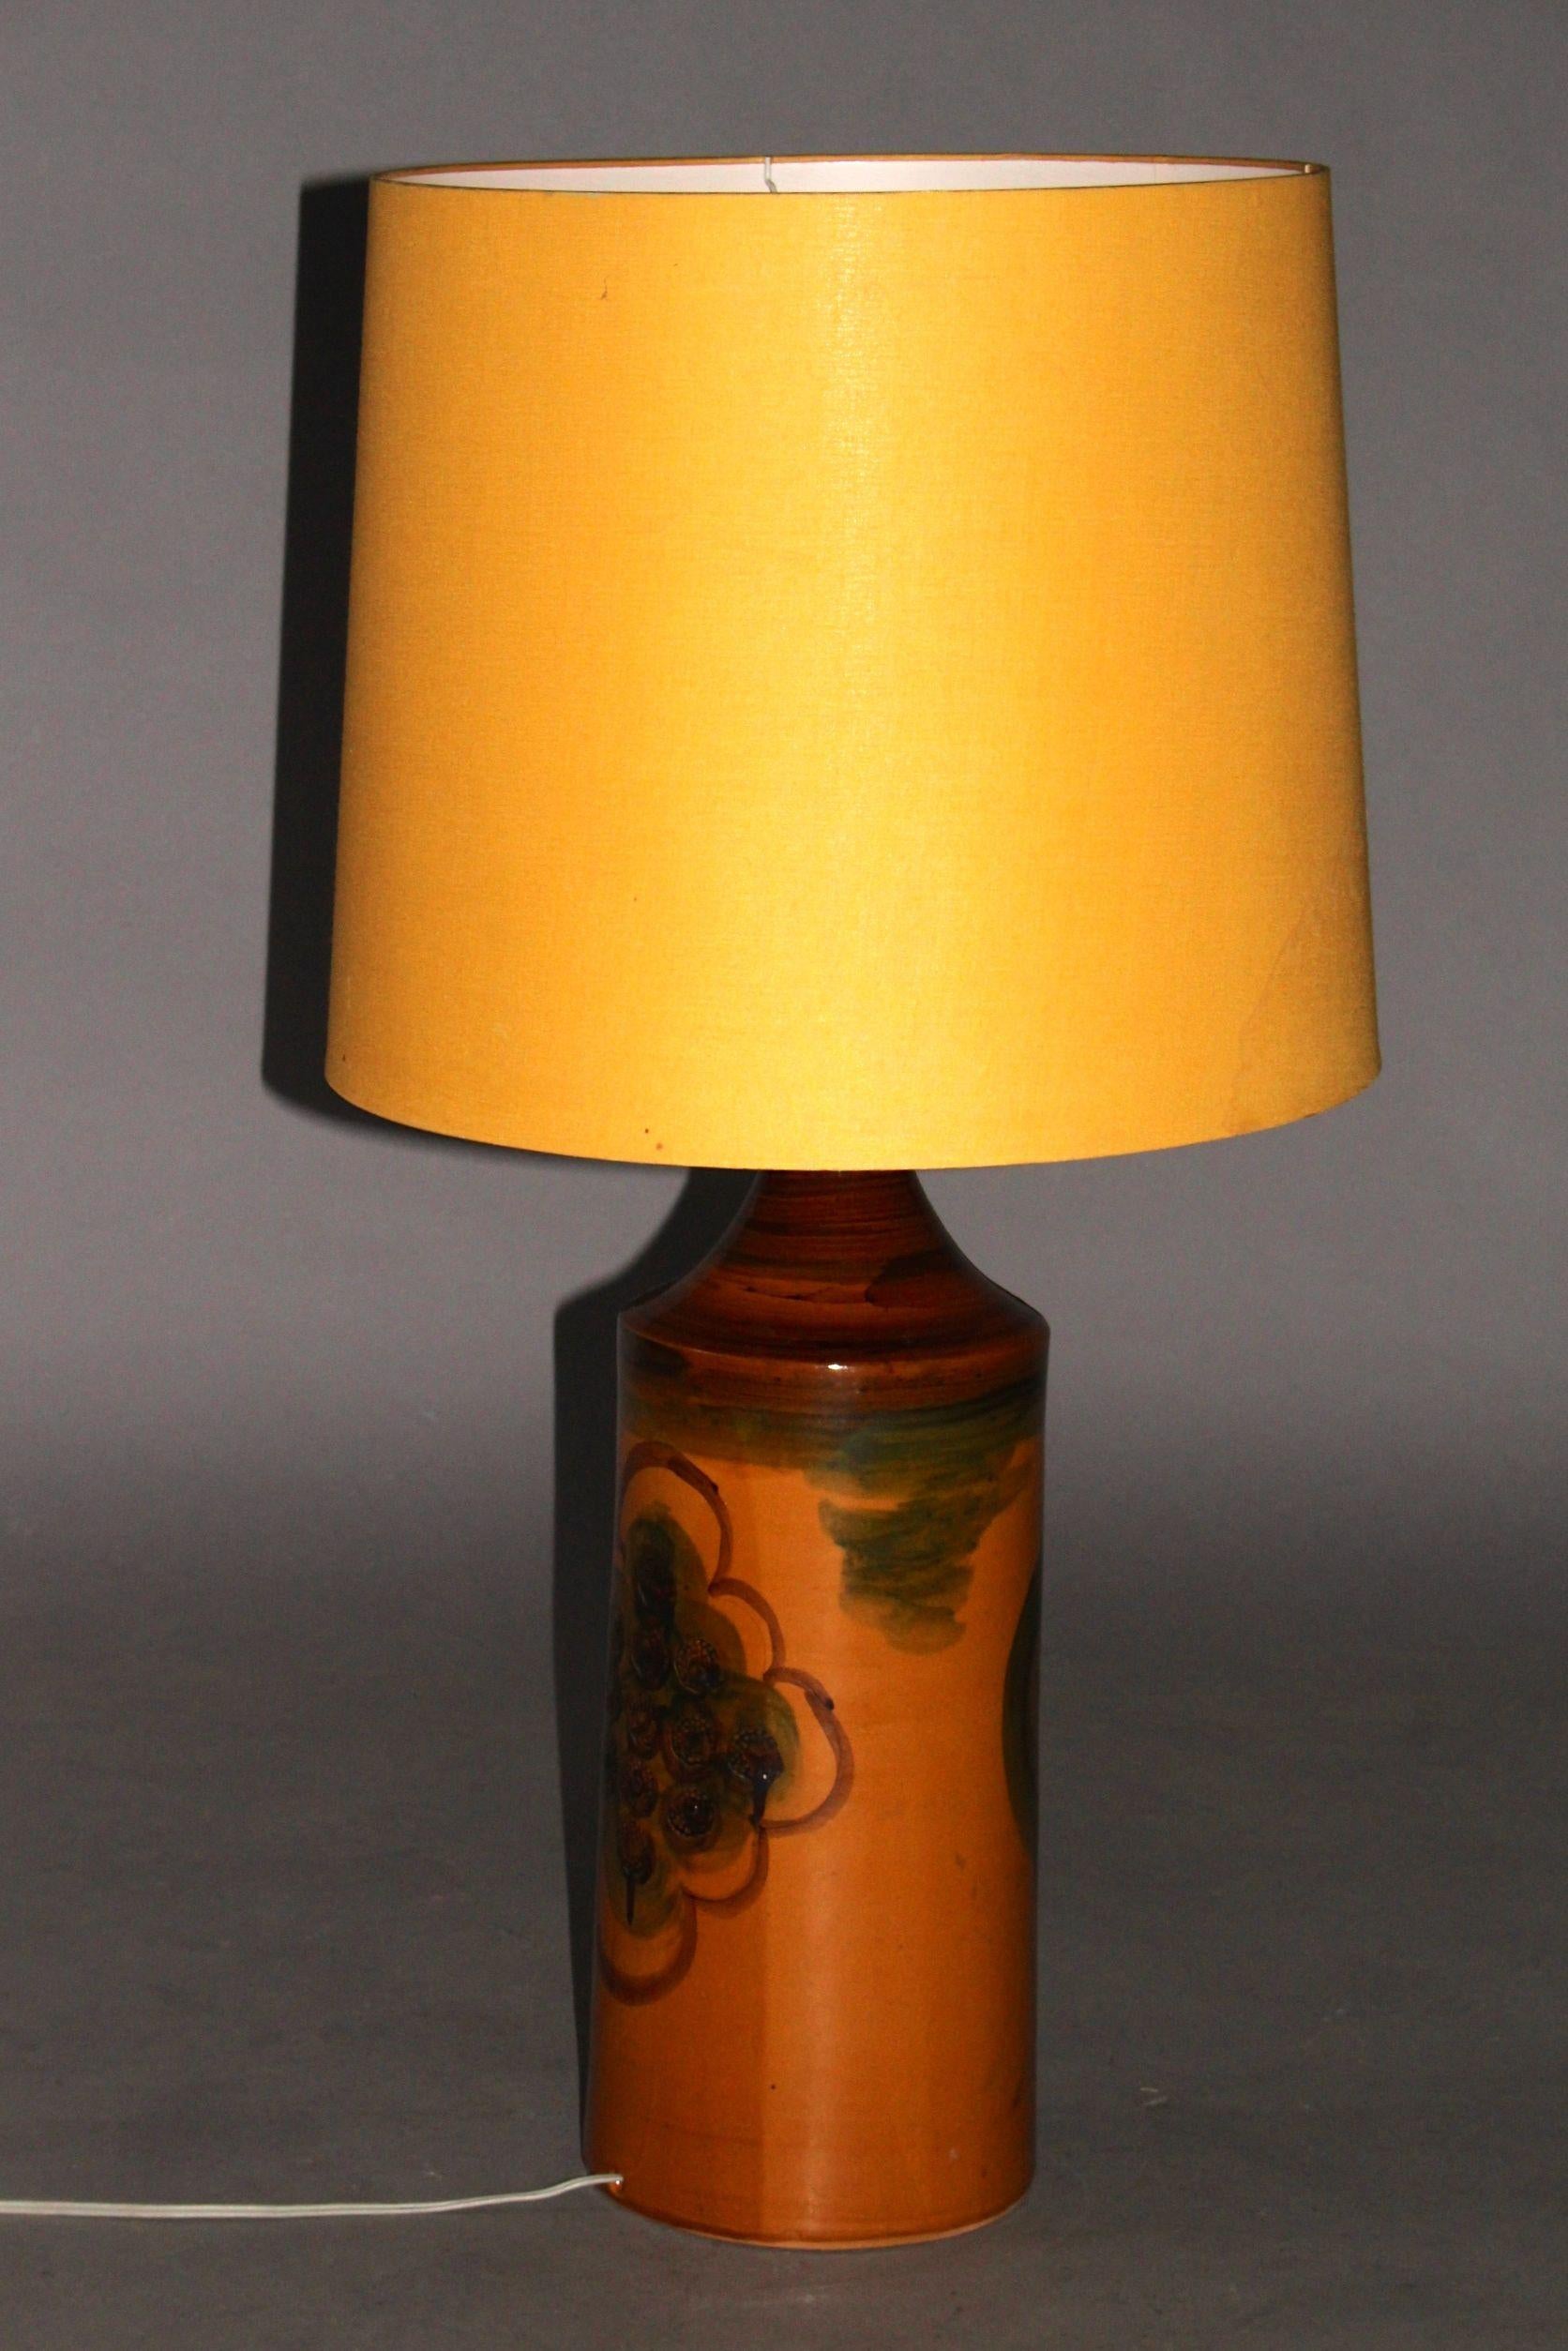 Danish ceramic table lamp the shade must be wash dimensions without shade height 76, diameter 20 cm.